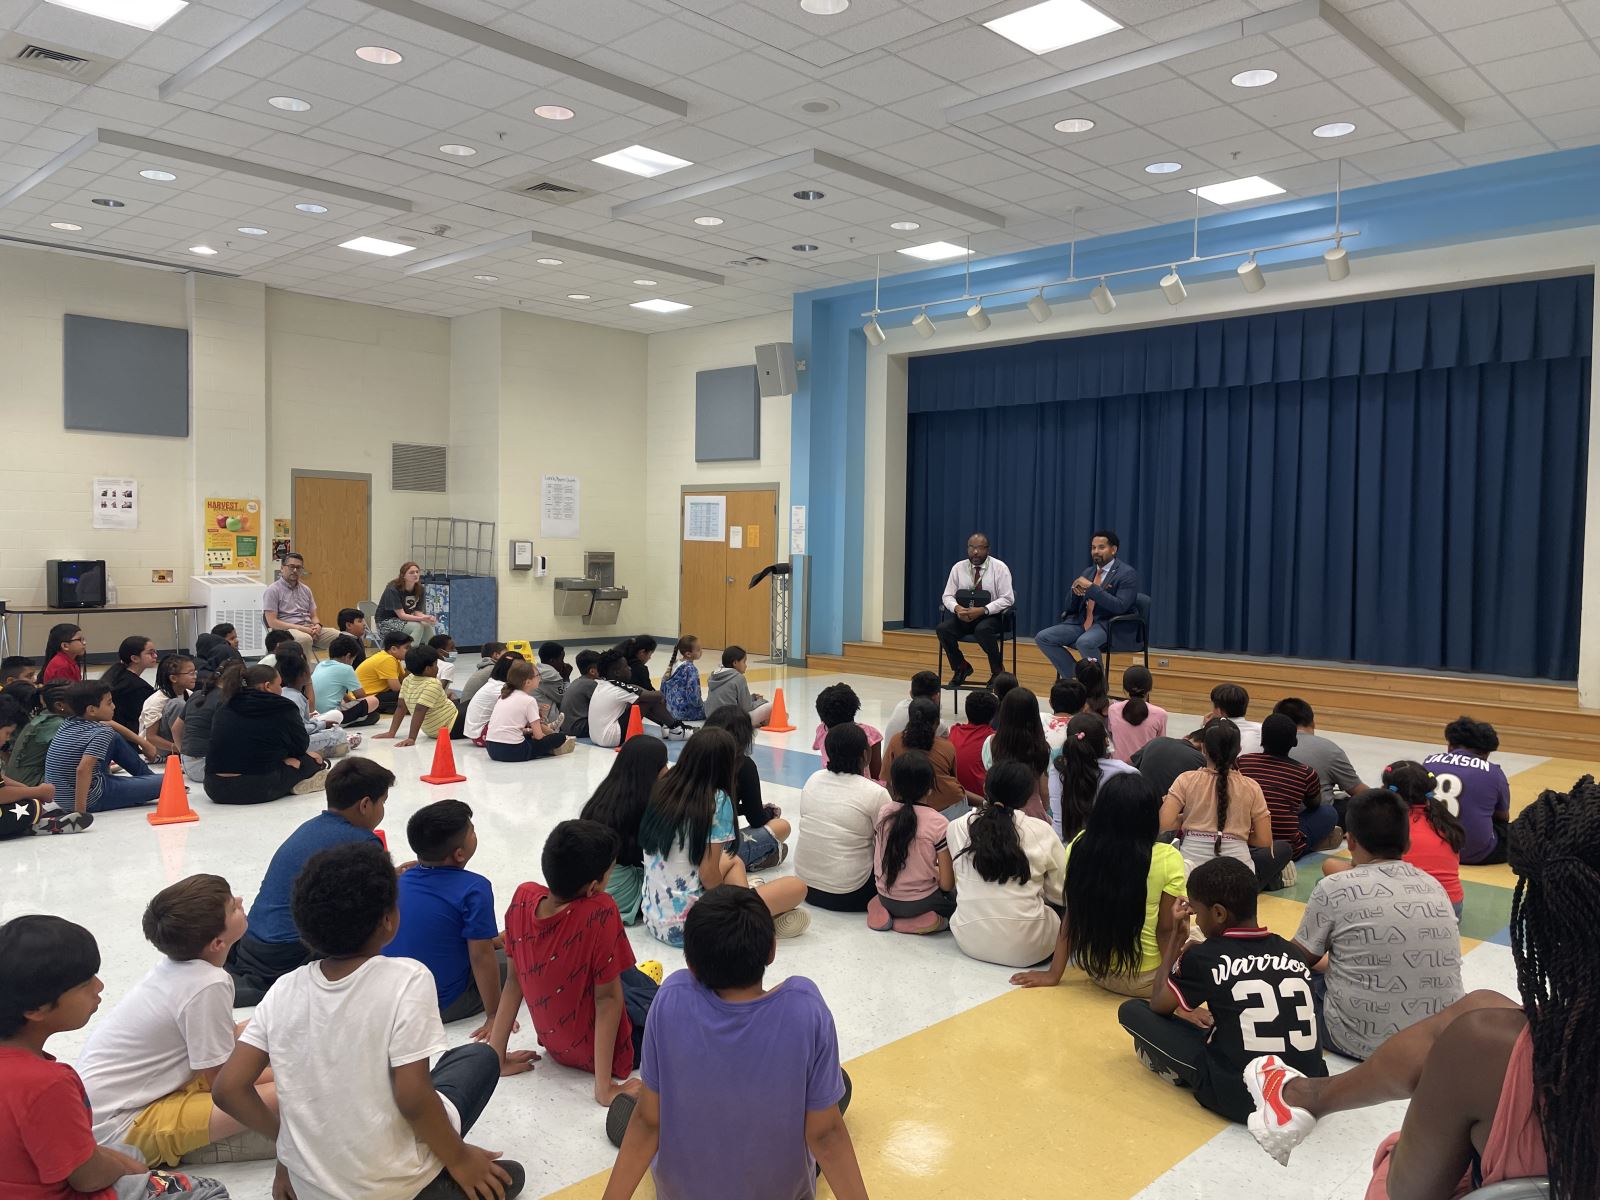 Councilmember Jawando participates in an assembly with elementary schoolers.